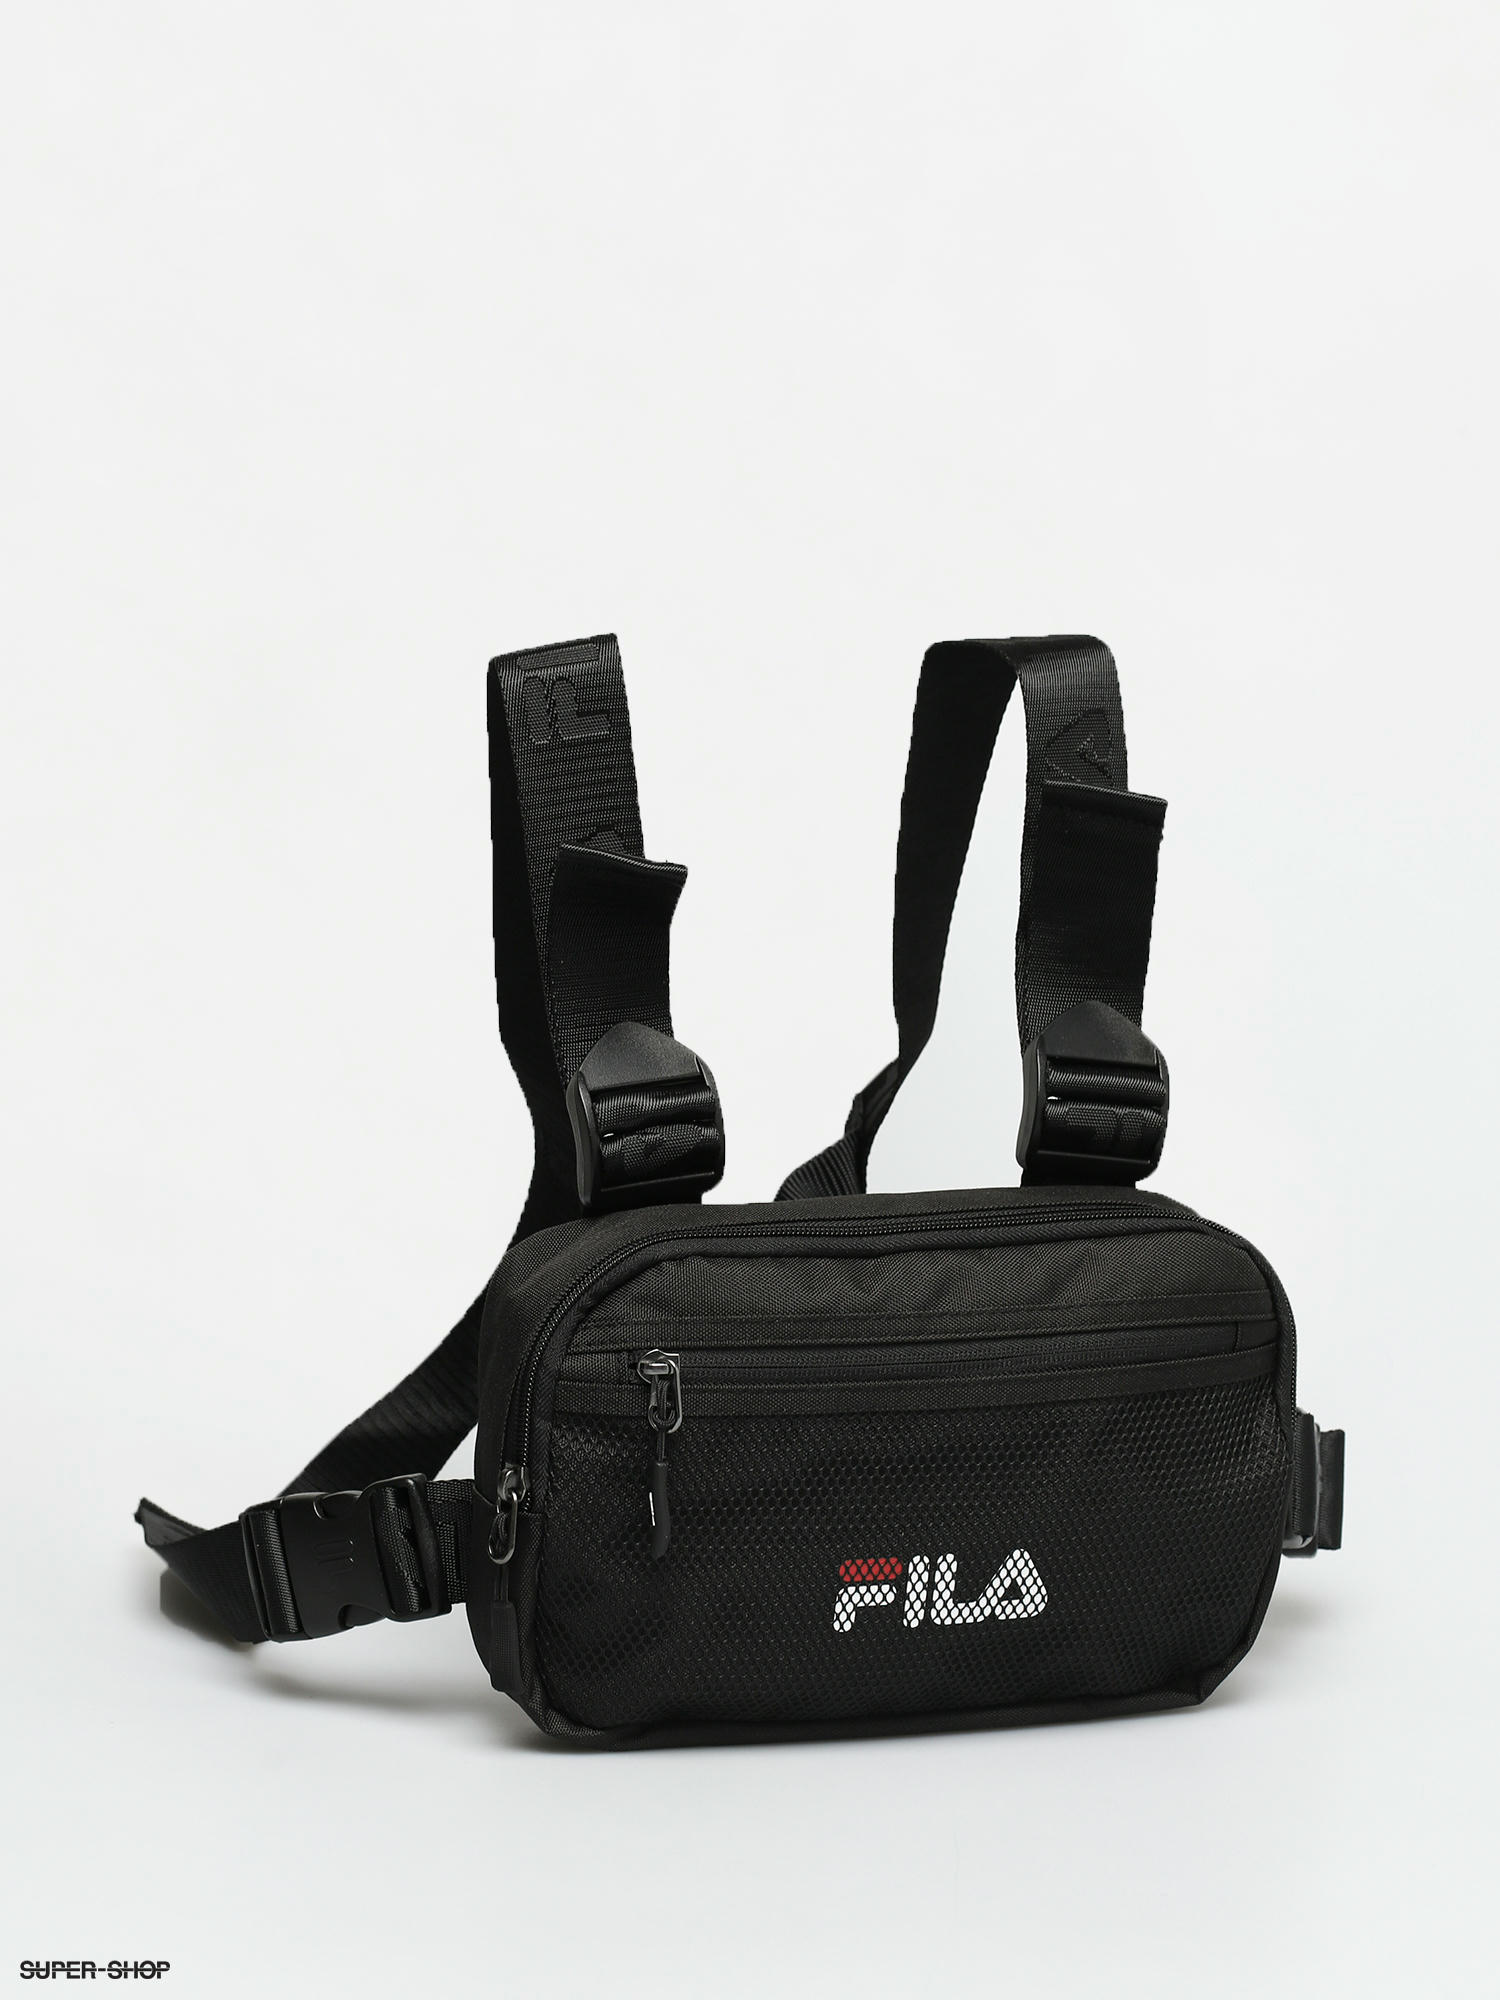 Buy Fila Acer Large Sport Duffel Bag, Black/White, One Size at Amazon.in